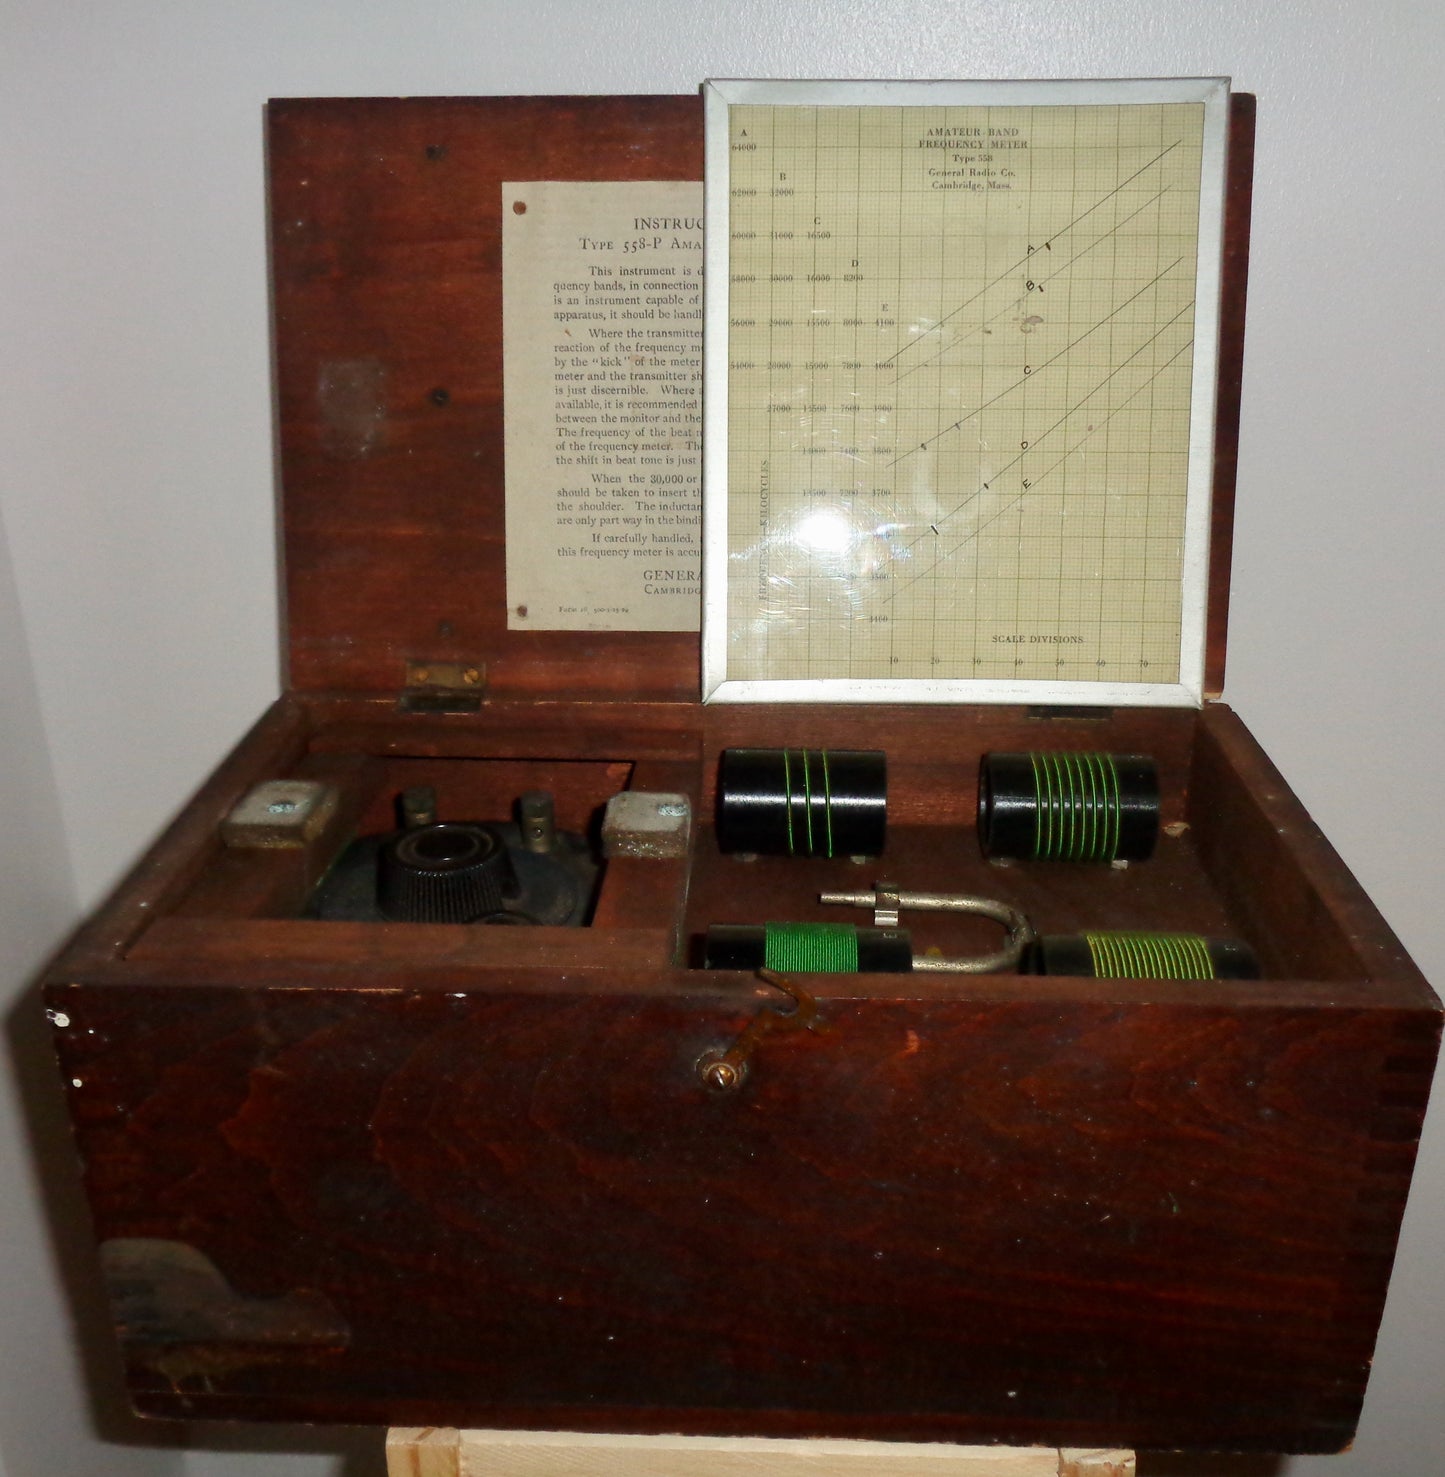 1929 General Radio Type 558-P Amateur Band Frequency Meter In Wood Transit Case